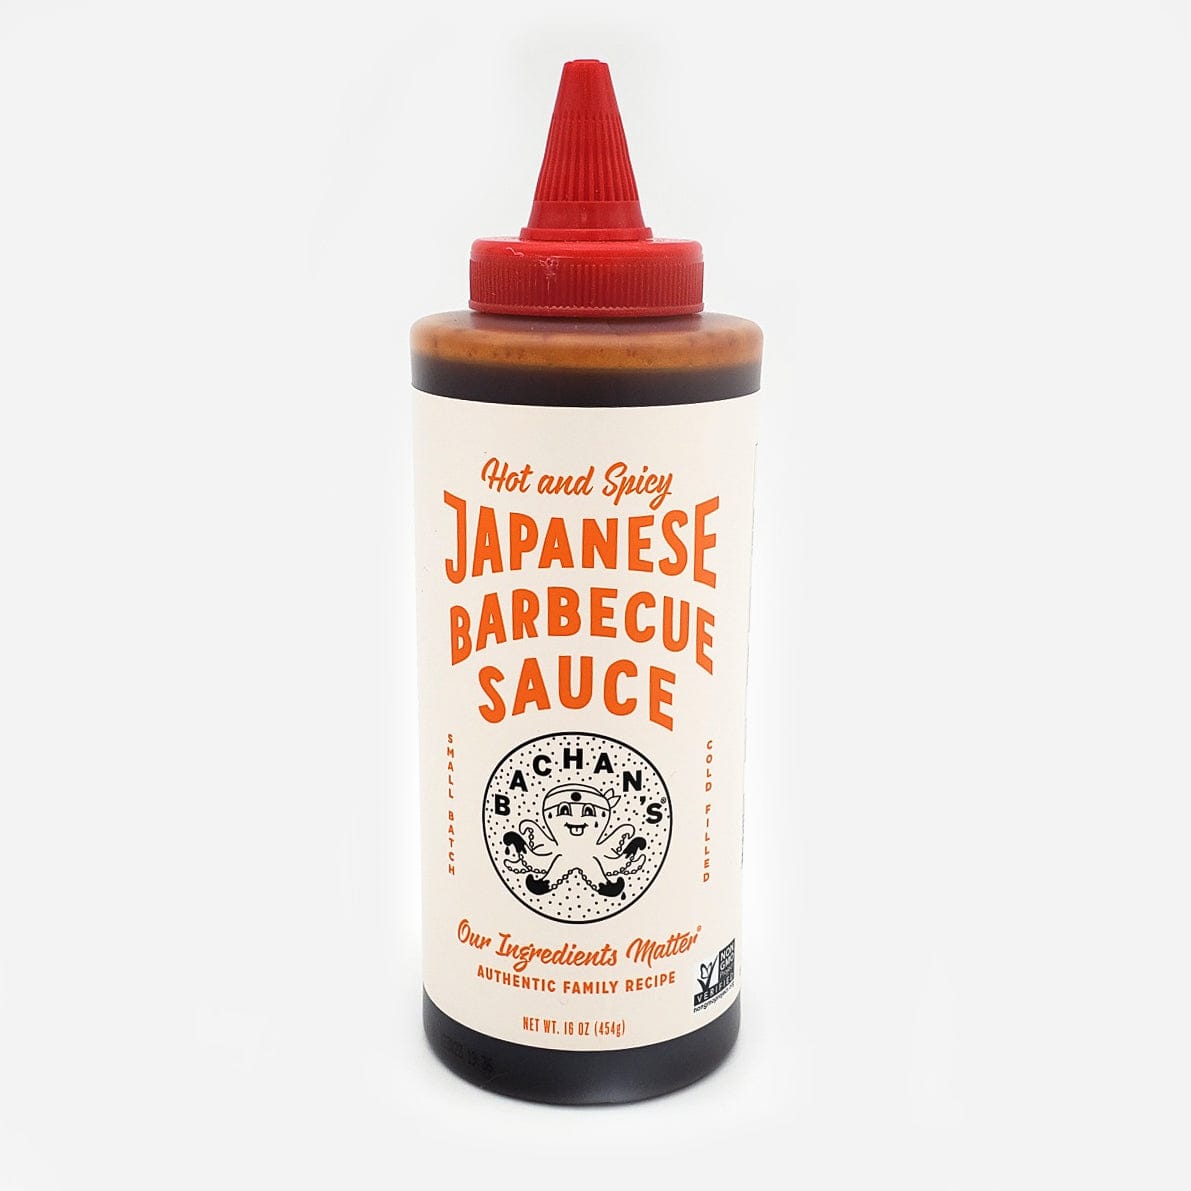 Bachan's Hot and Spicy Japanese Barbecue Sauce 16oz